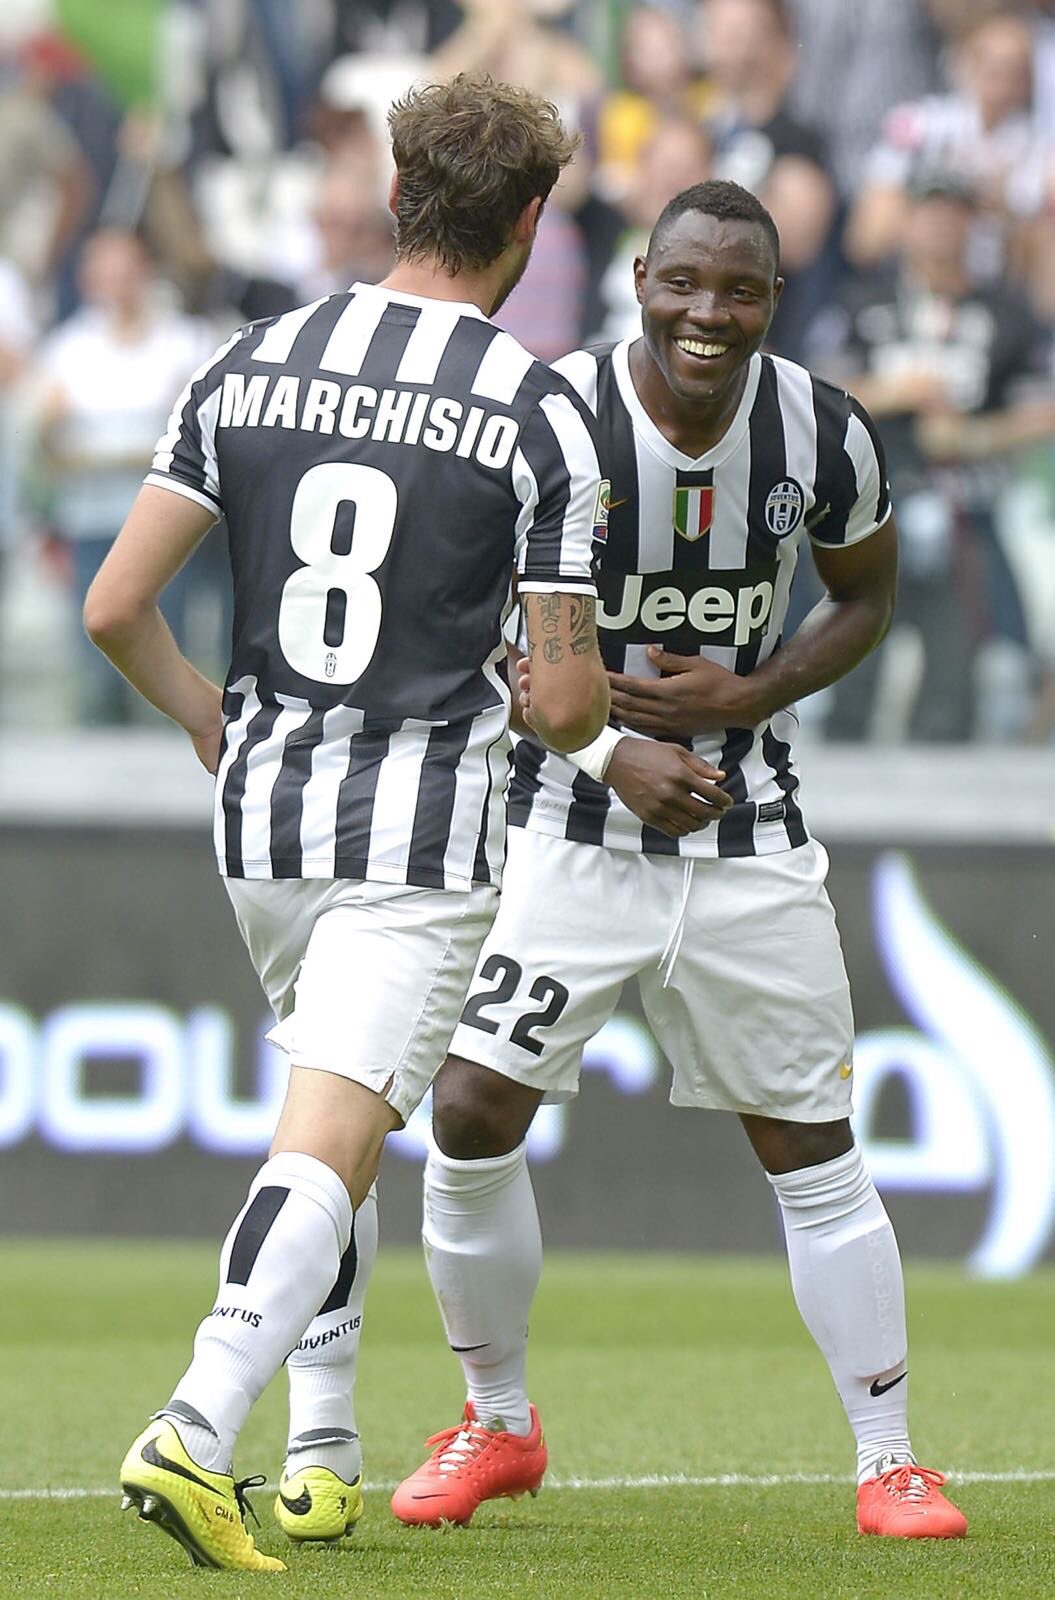 Juventus teammate wishes happy 29th birthday |More here:  